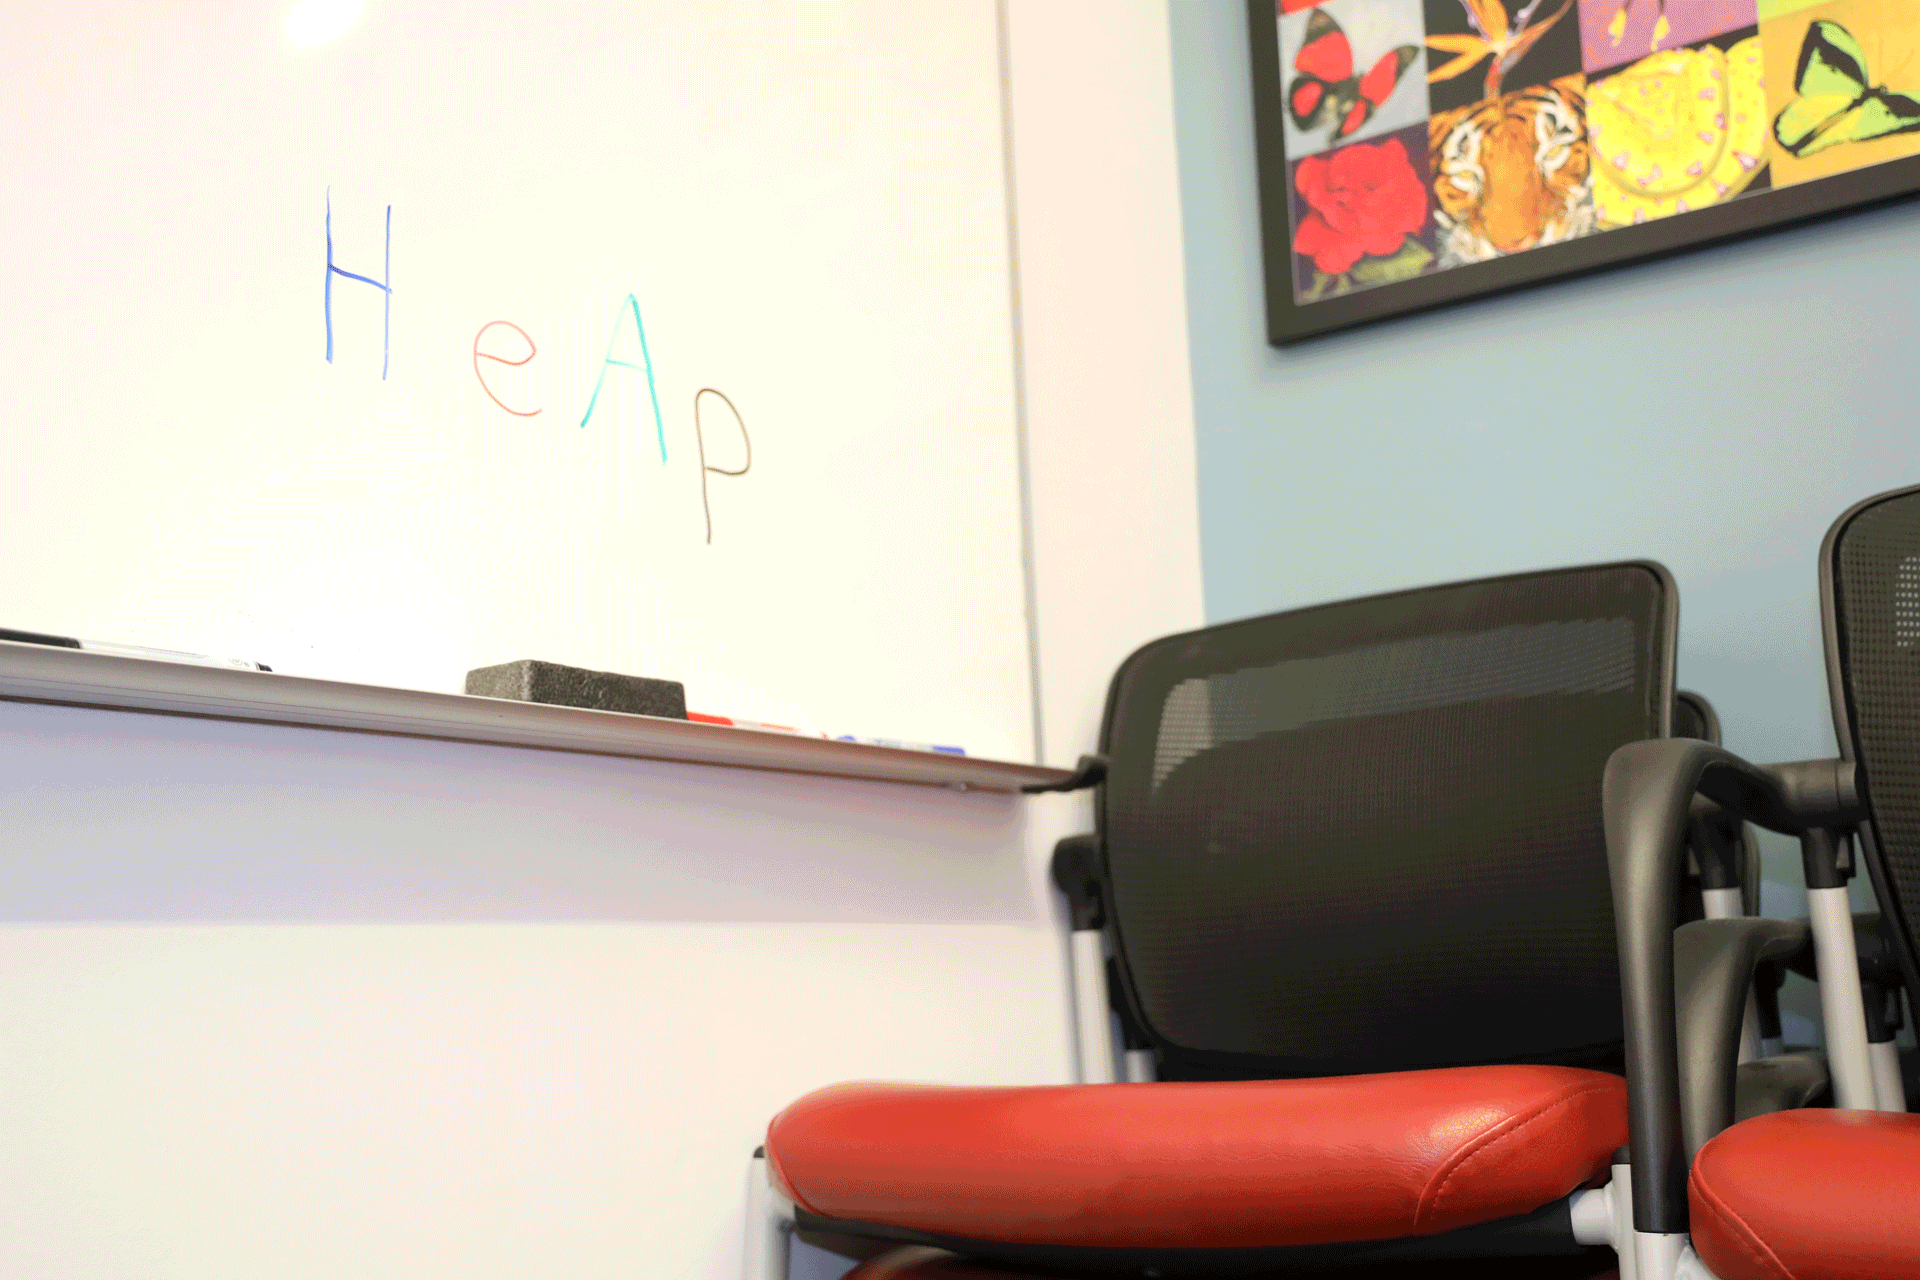 Paper piles up on a chair as text on a whiteboard states "A heap"